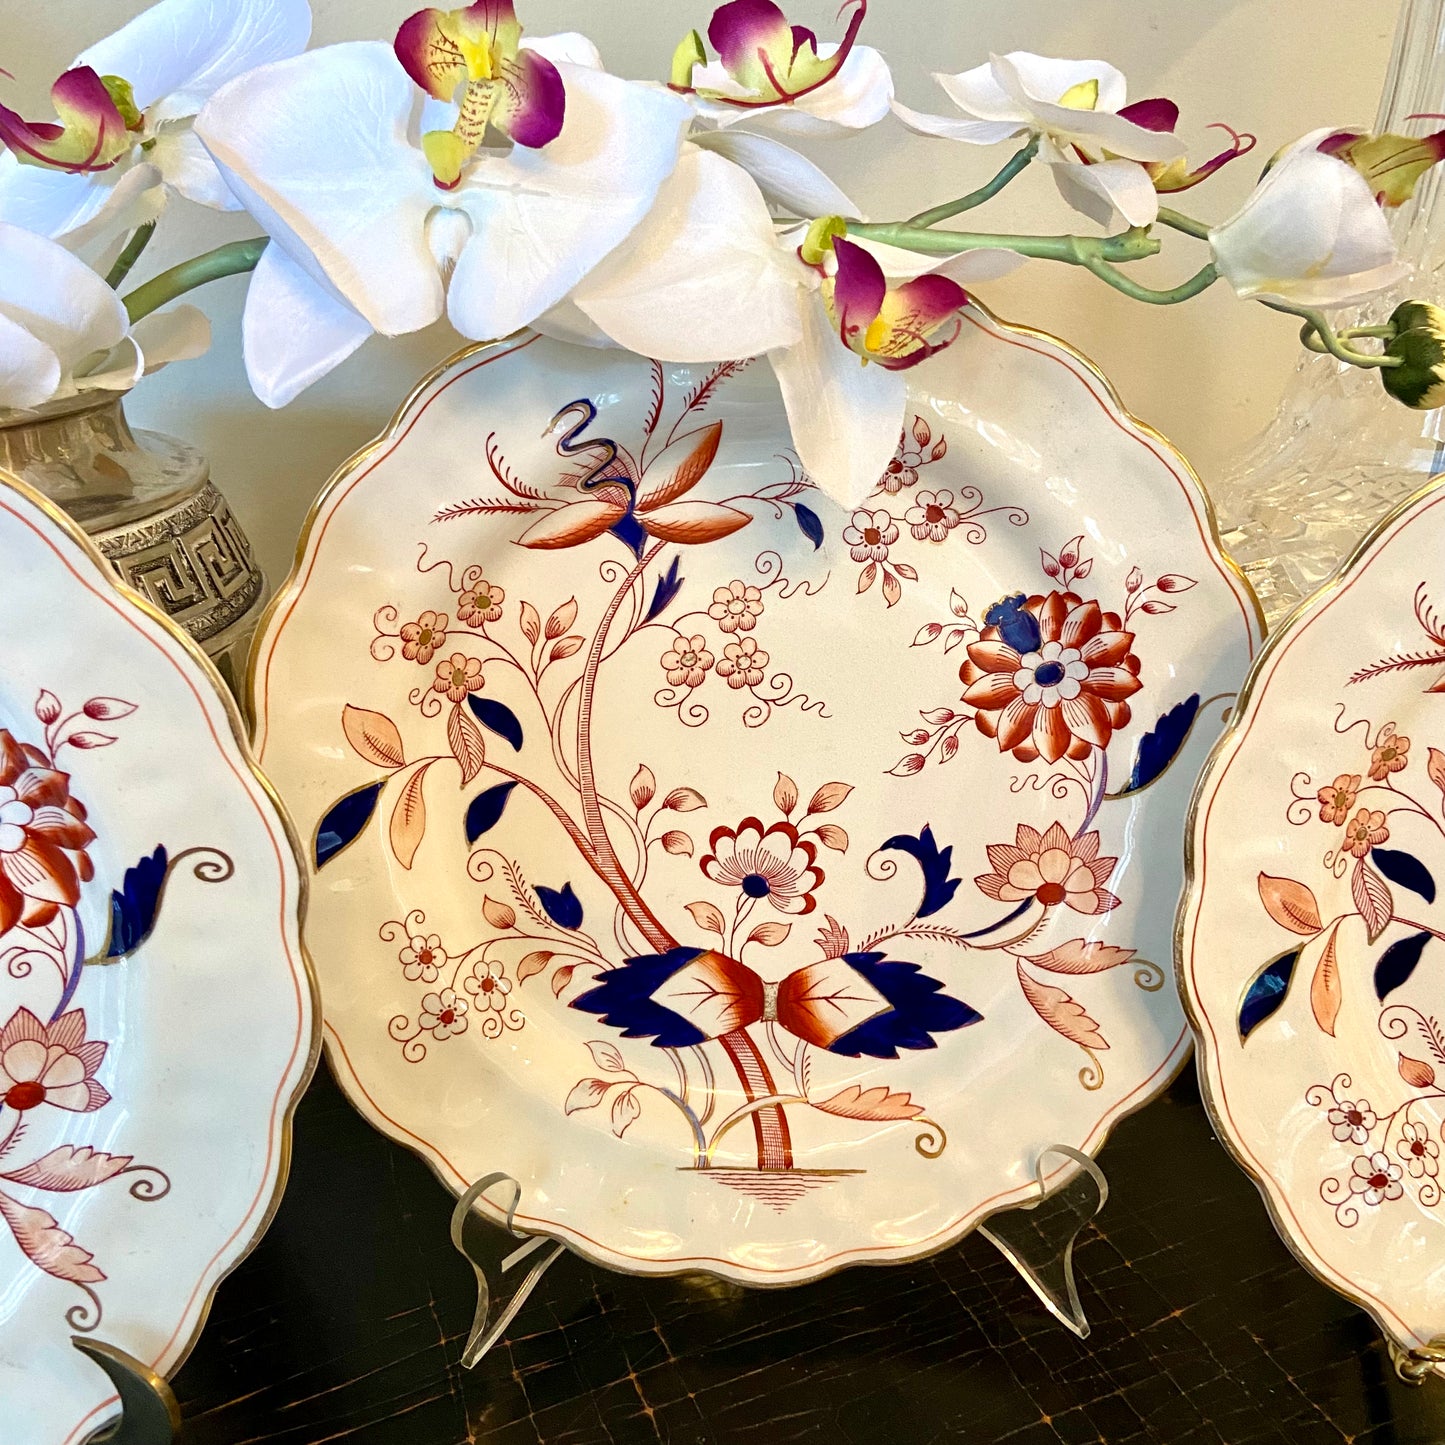 STUNNING - BOOTHS "FREIAN” China set of 3 Dinner Imari floral blue and white plates